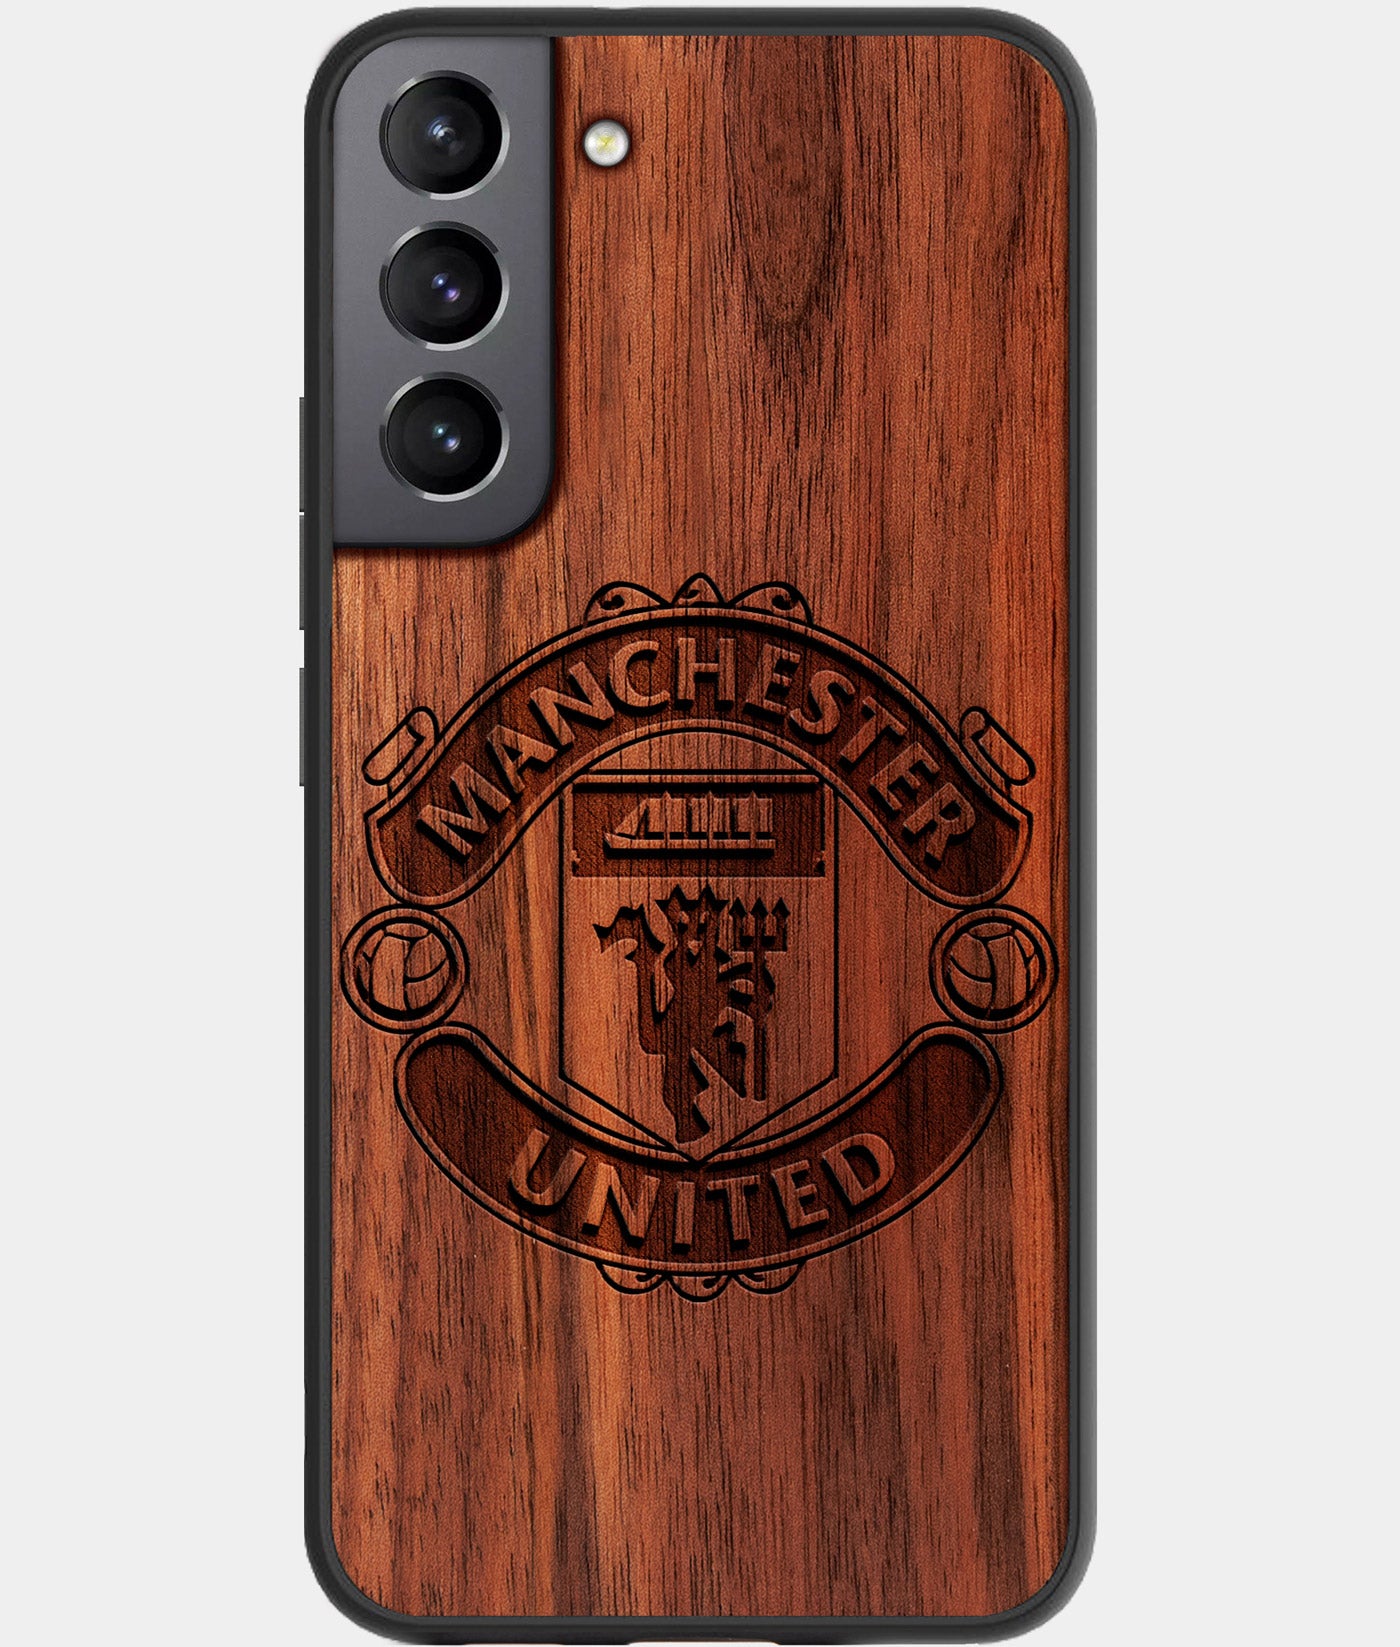 Best Wood Manchester United F.C. Samsung Galaxy S22 Case - Custom Engraved Cover - Engraved In Nature